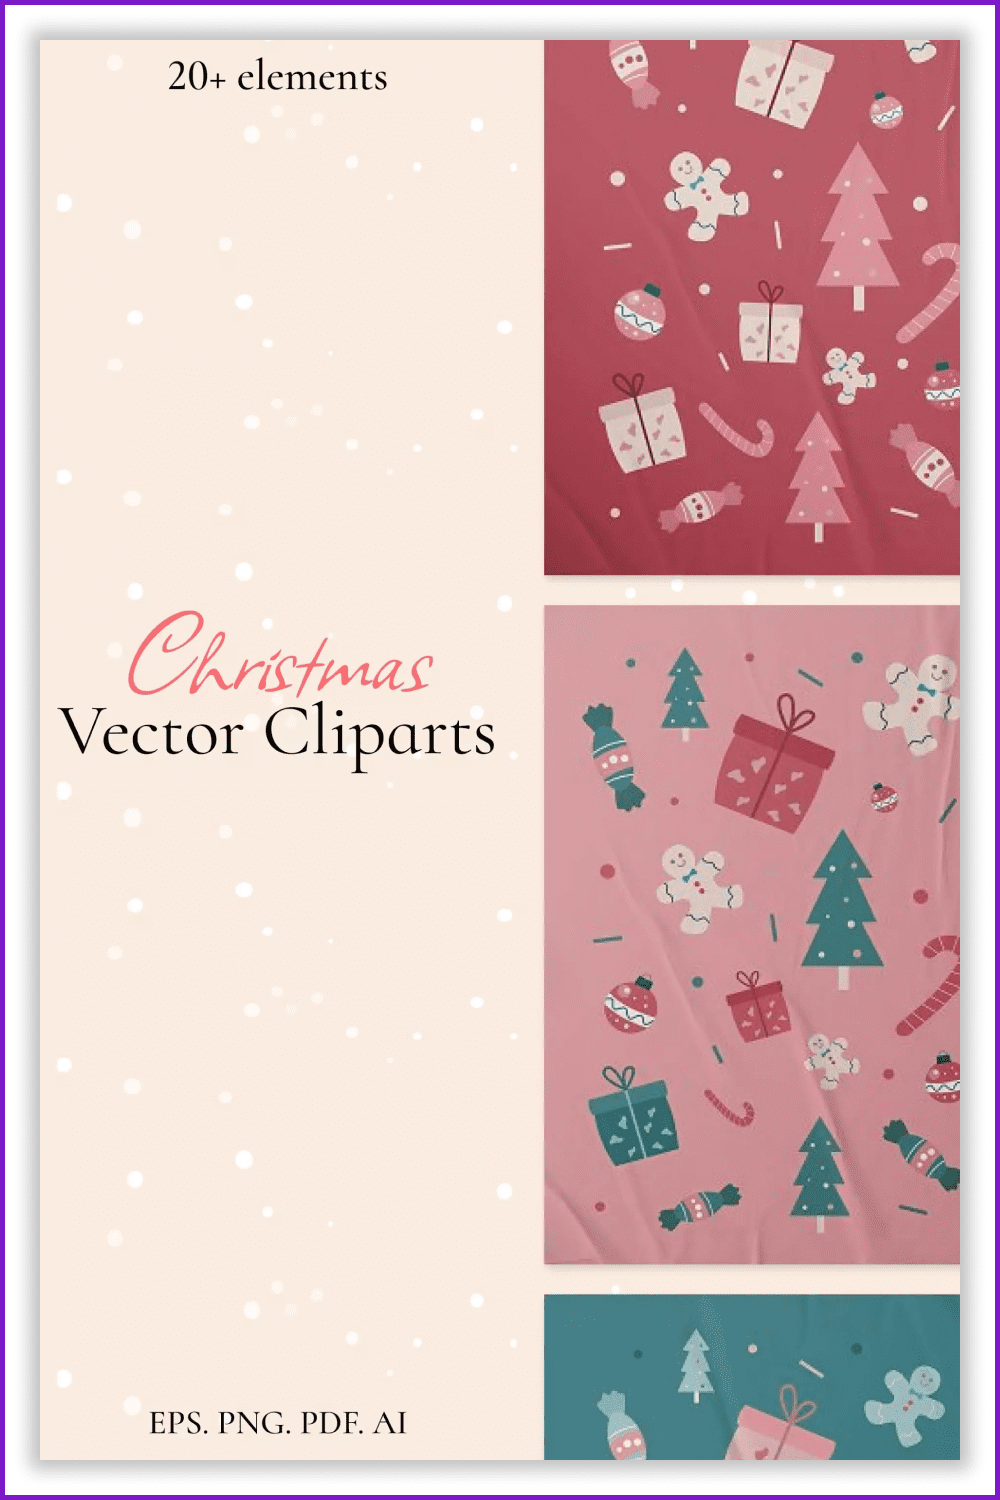 Collage of images of Christmas symbols on pink, red and green backgrounds.